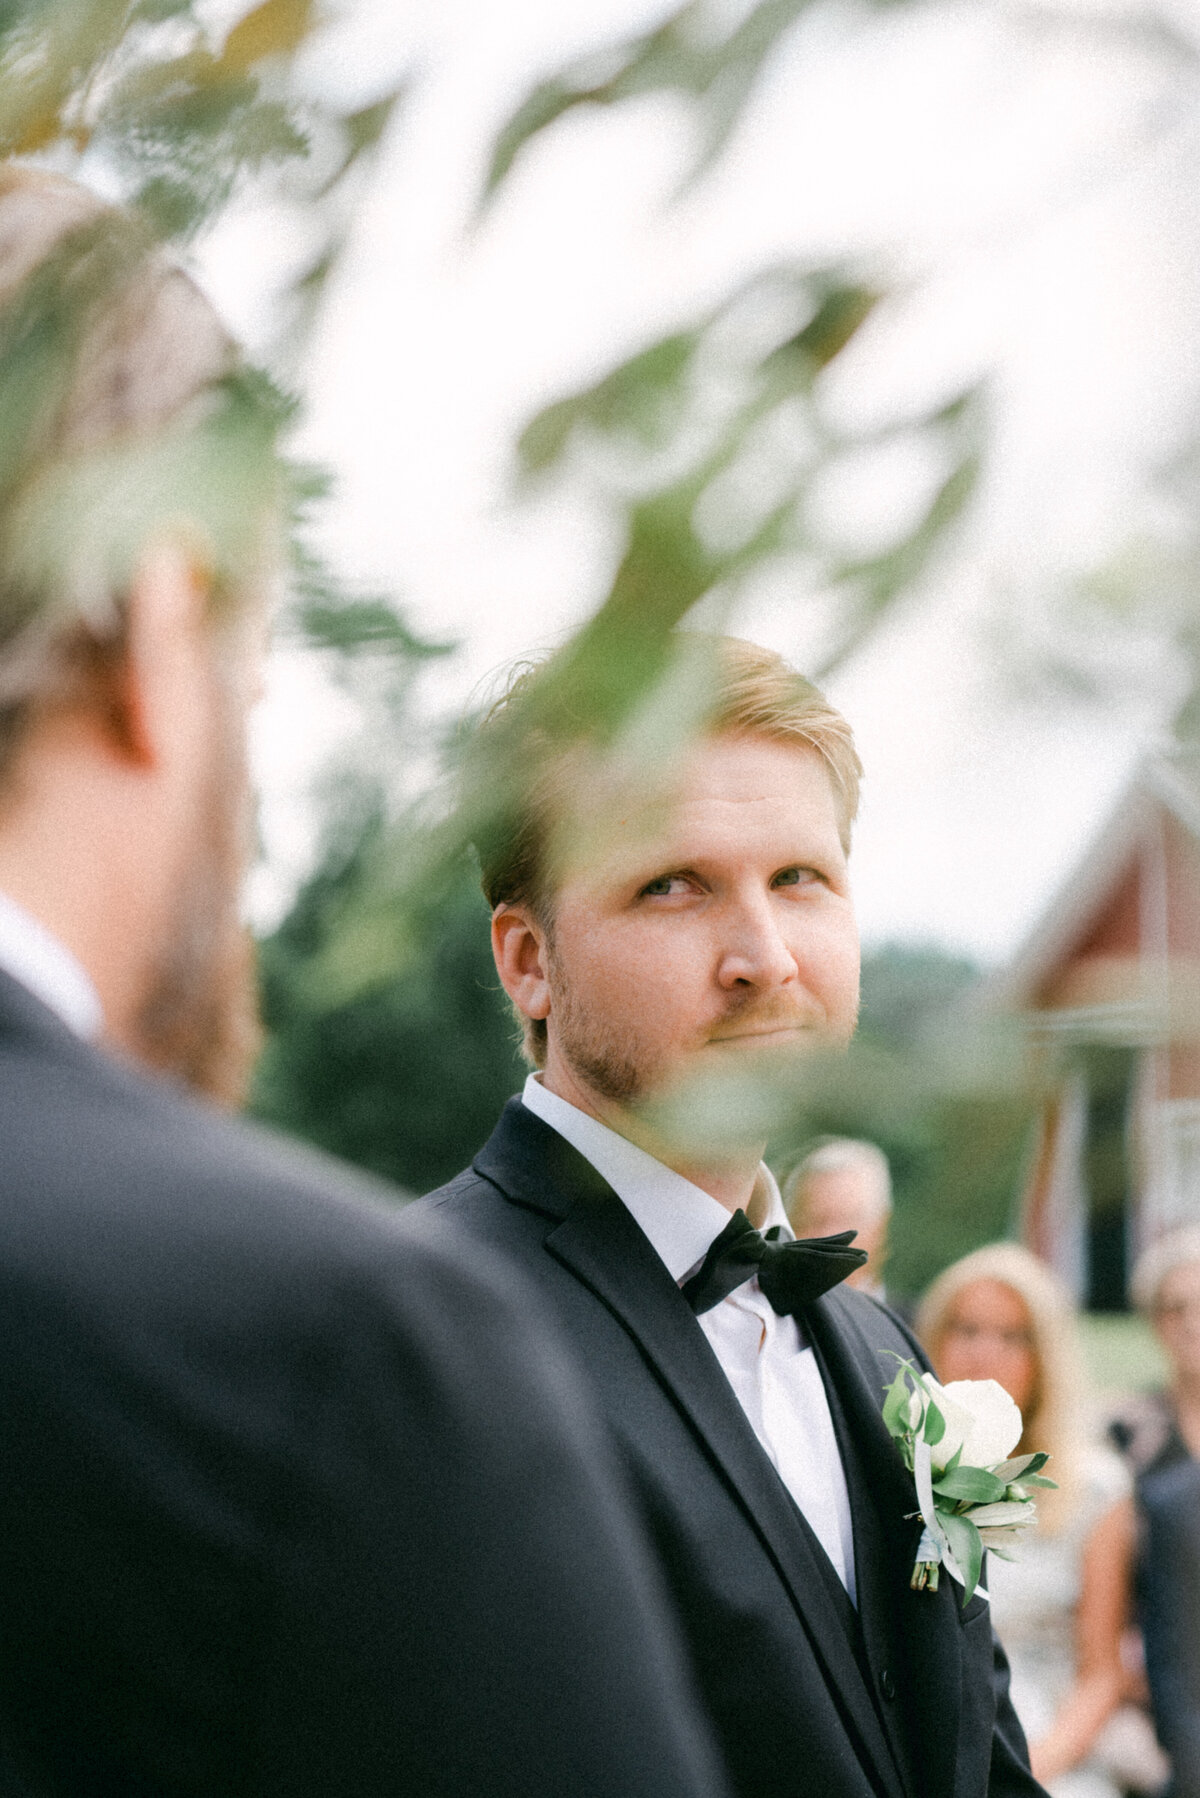 The groom in the wedding ceremony photographed by wedding photographer Hannika Gabrielsson.